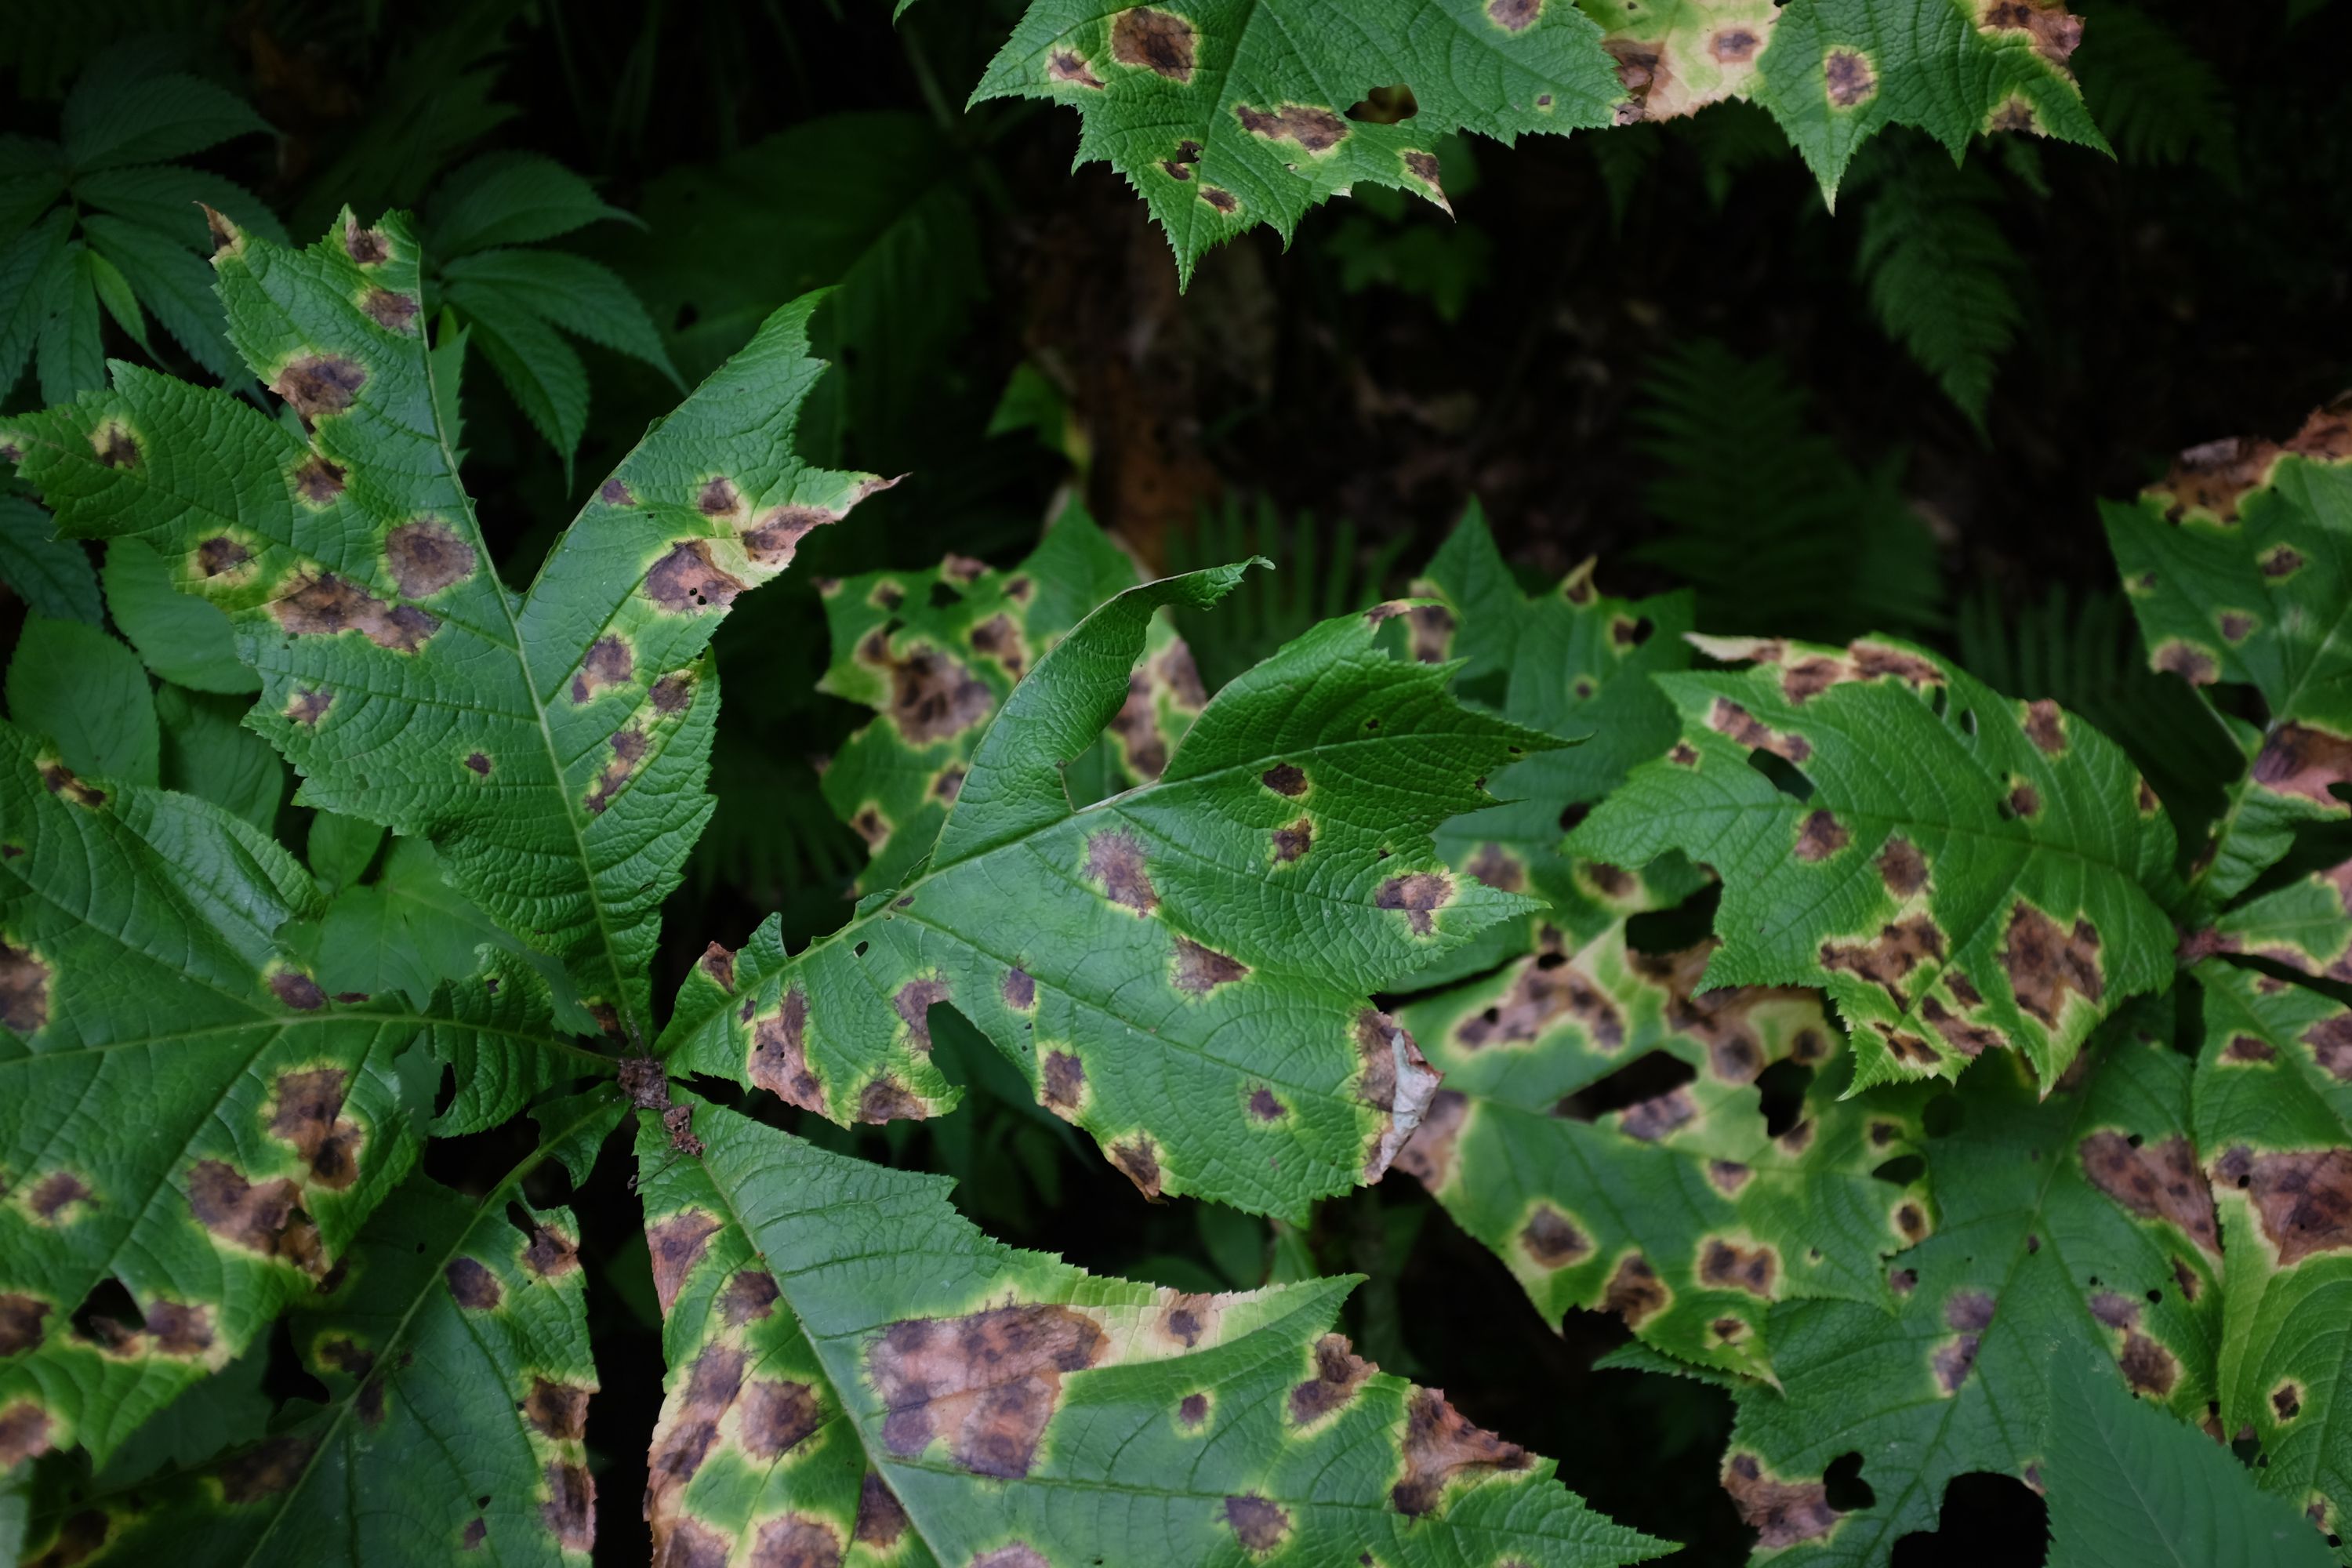 Very green leaves covered in brown-yellow dots.